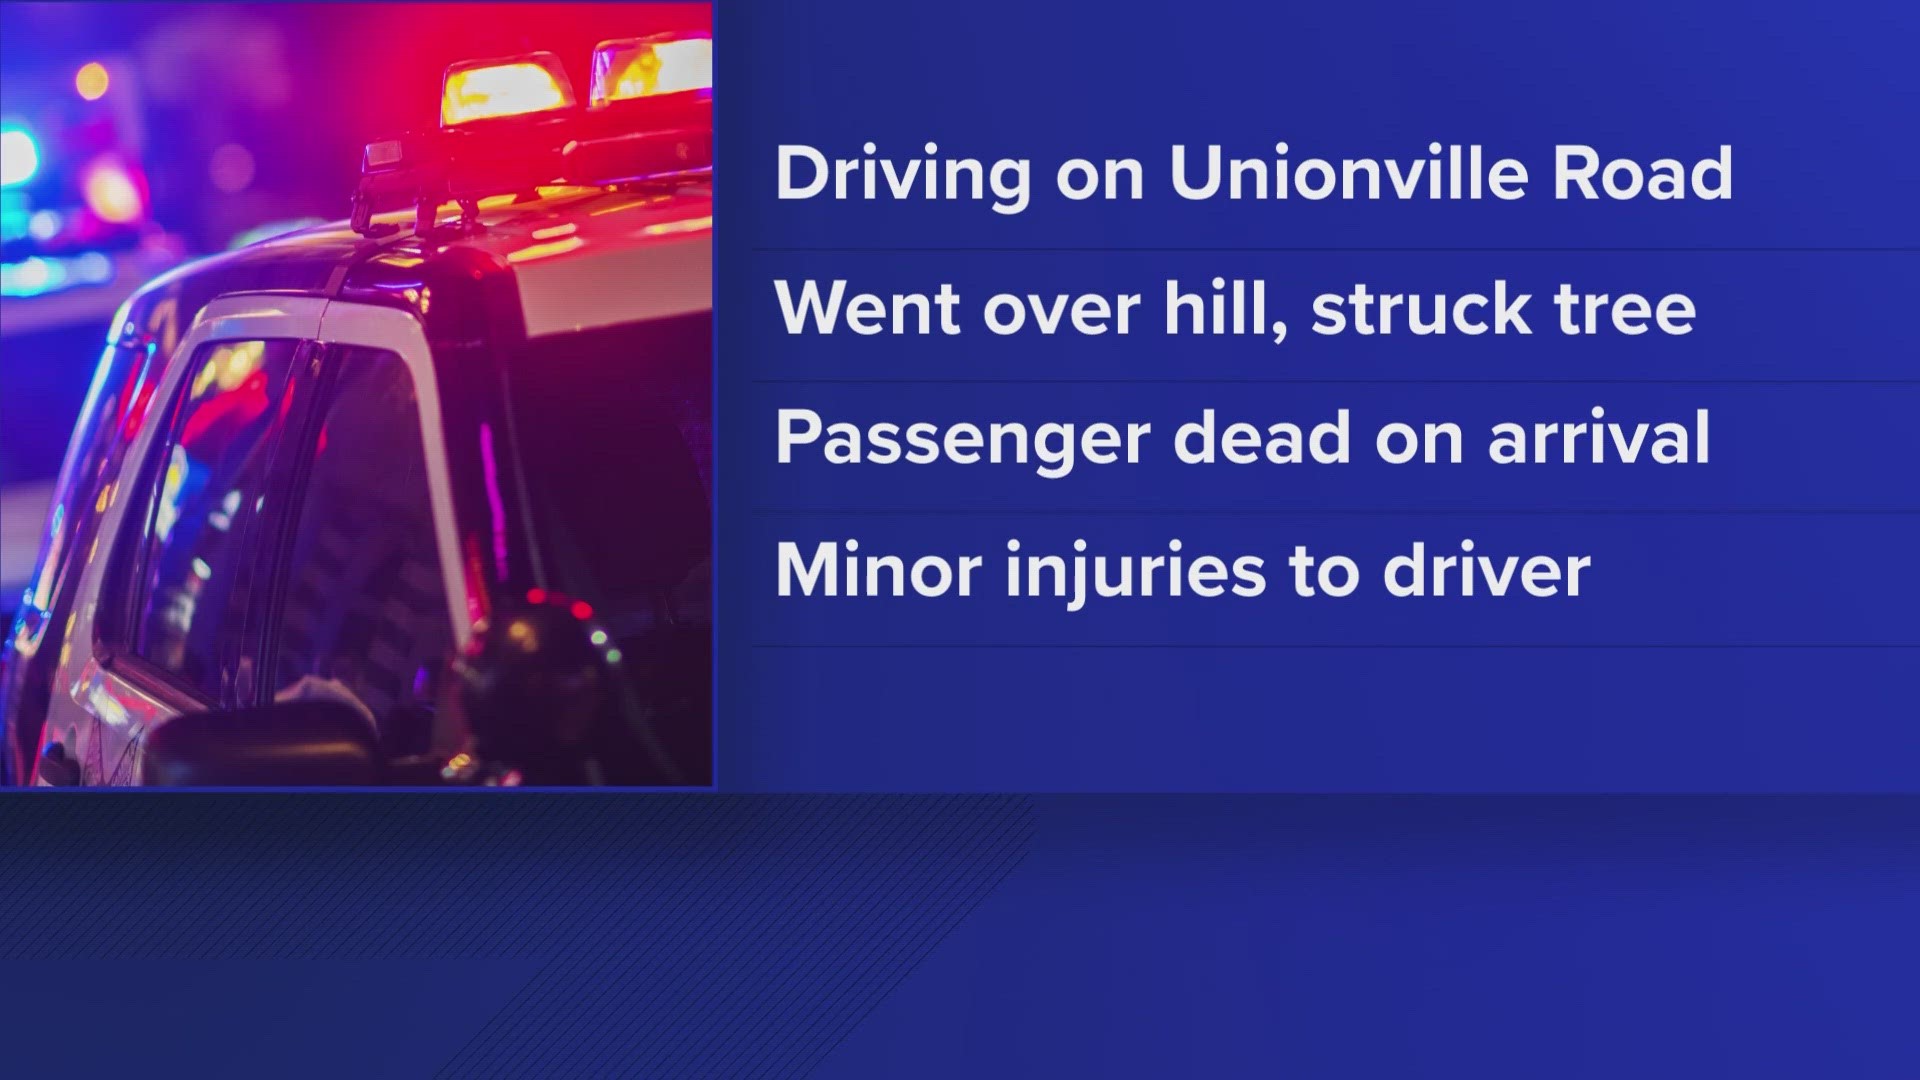 One unnamed person was killed in a single-vehicle crash Sunday afternoon on Unionville Road, according to Maine State Police.